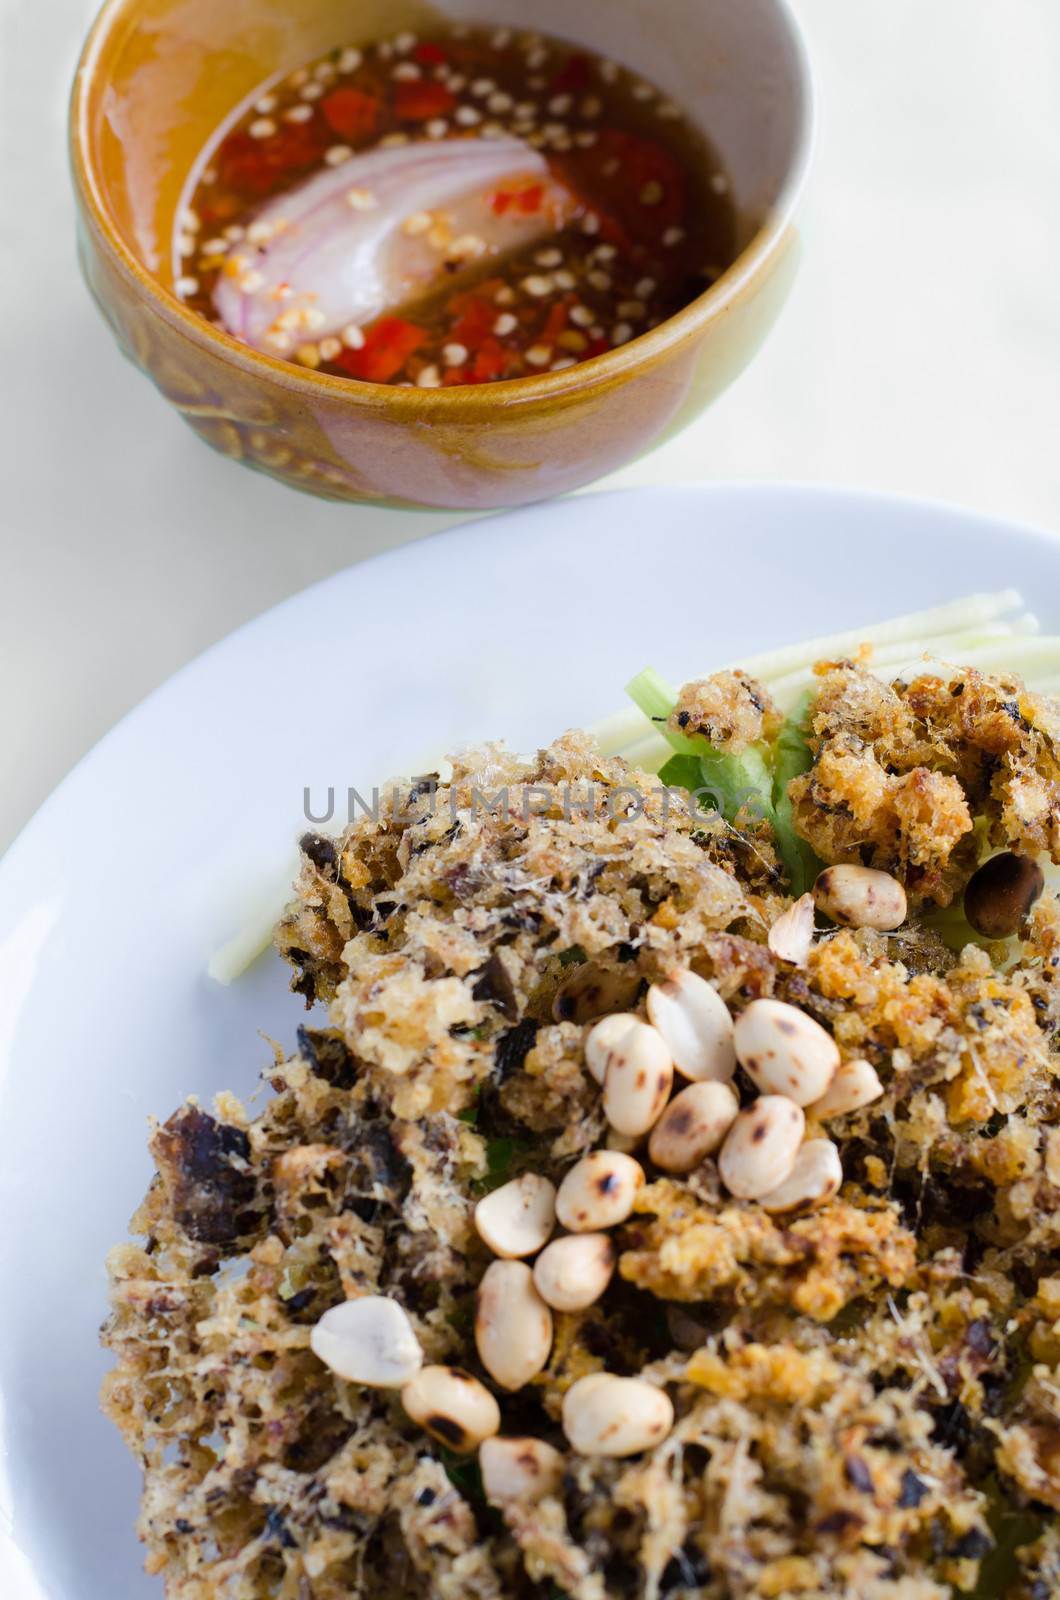 minced catfish salad with spicy sauce, delicious thai food